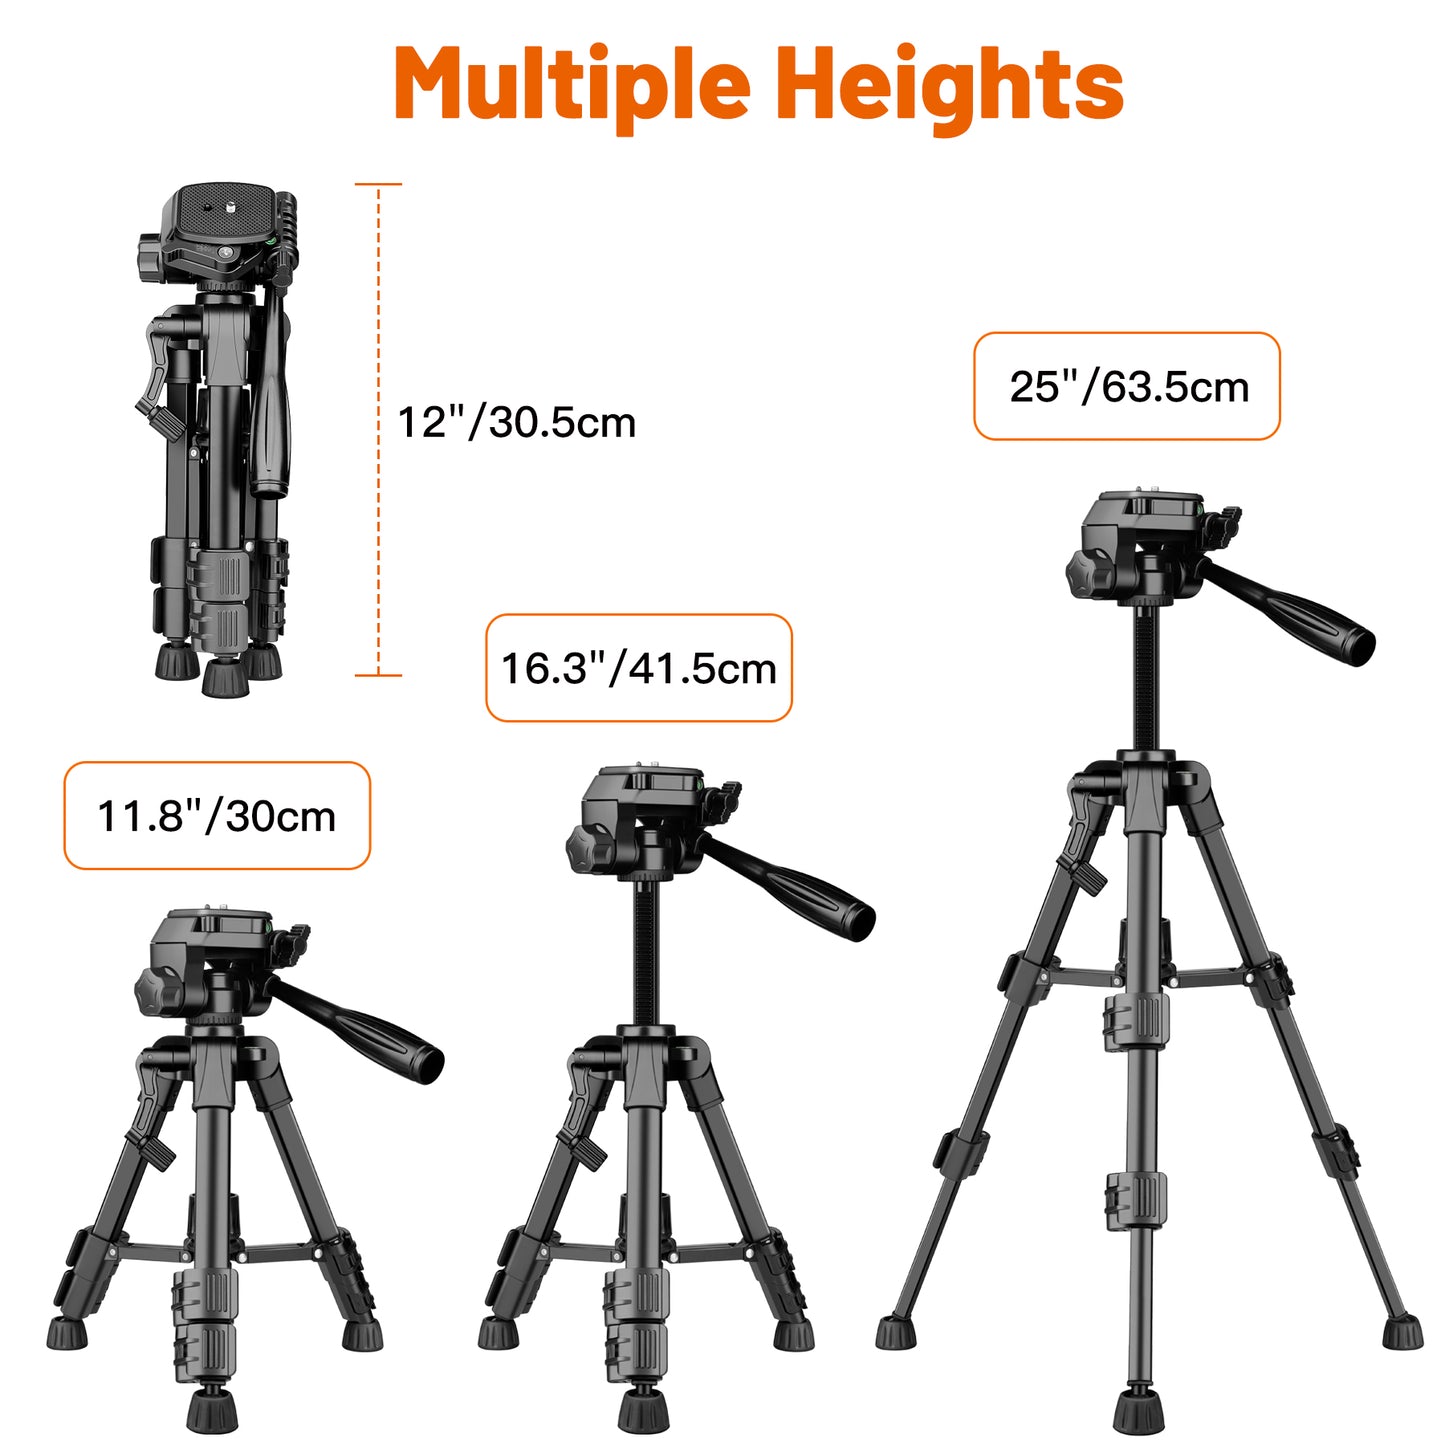 JOILCAN Mini Tripod for Camera, Aluminium 25inch Portable Tripod Stand for iPhone, Lightweight Travel Tripod with Phone Holder & Remote Shutter for Smartphone/DSLR Cameras/Projectors/Video Camcorder(EU)